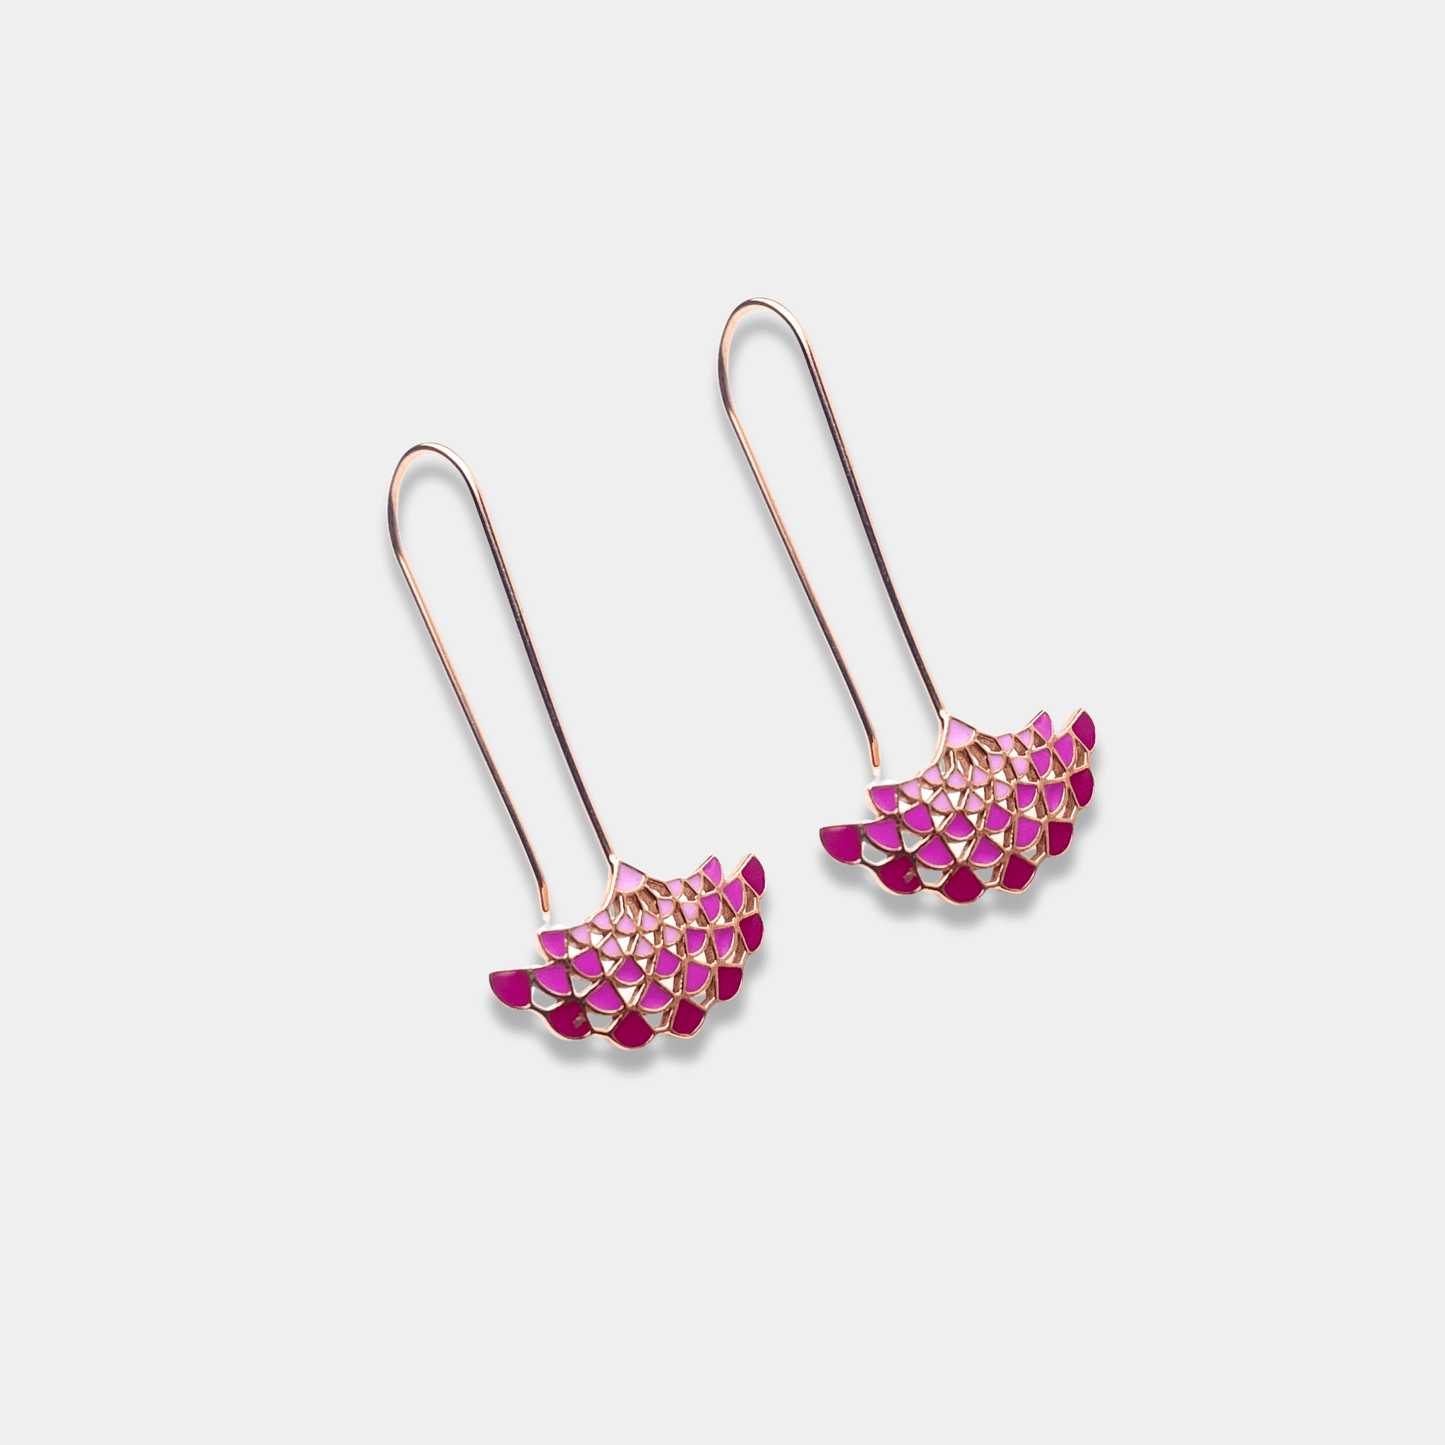 Sterling silver earrings featuring a beautiful flower design in pink and gold, a stylish accessory for any occasion.